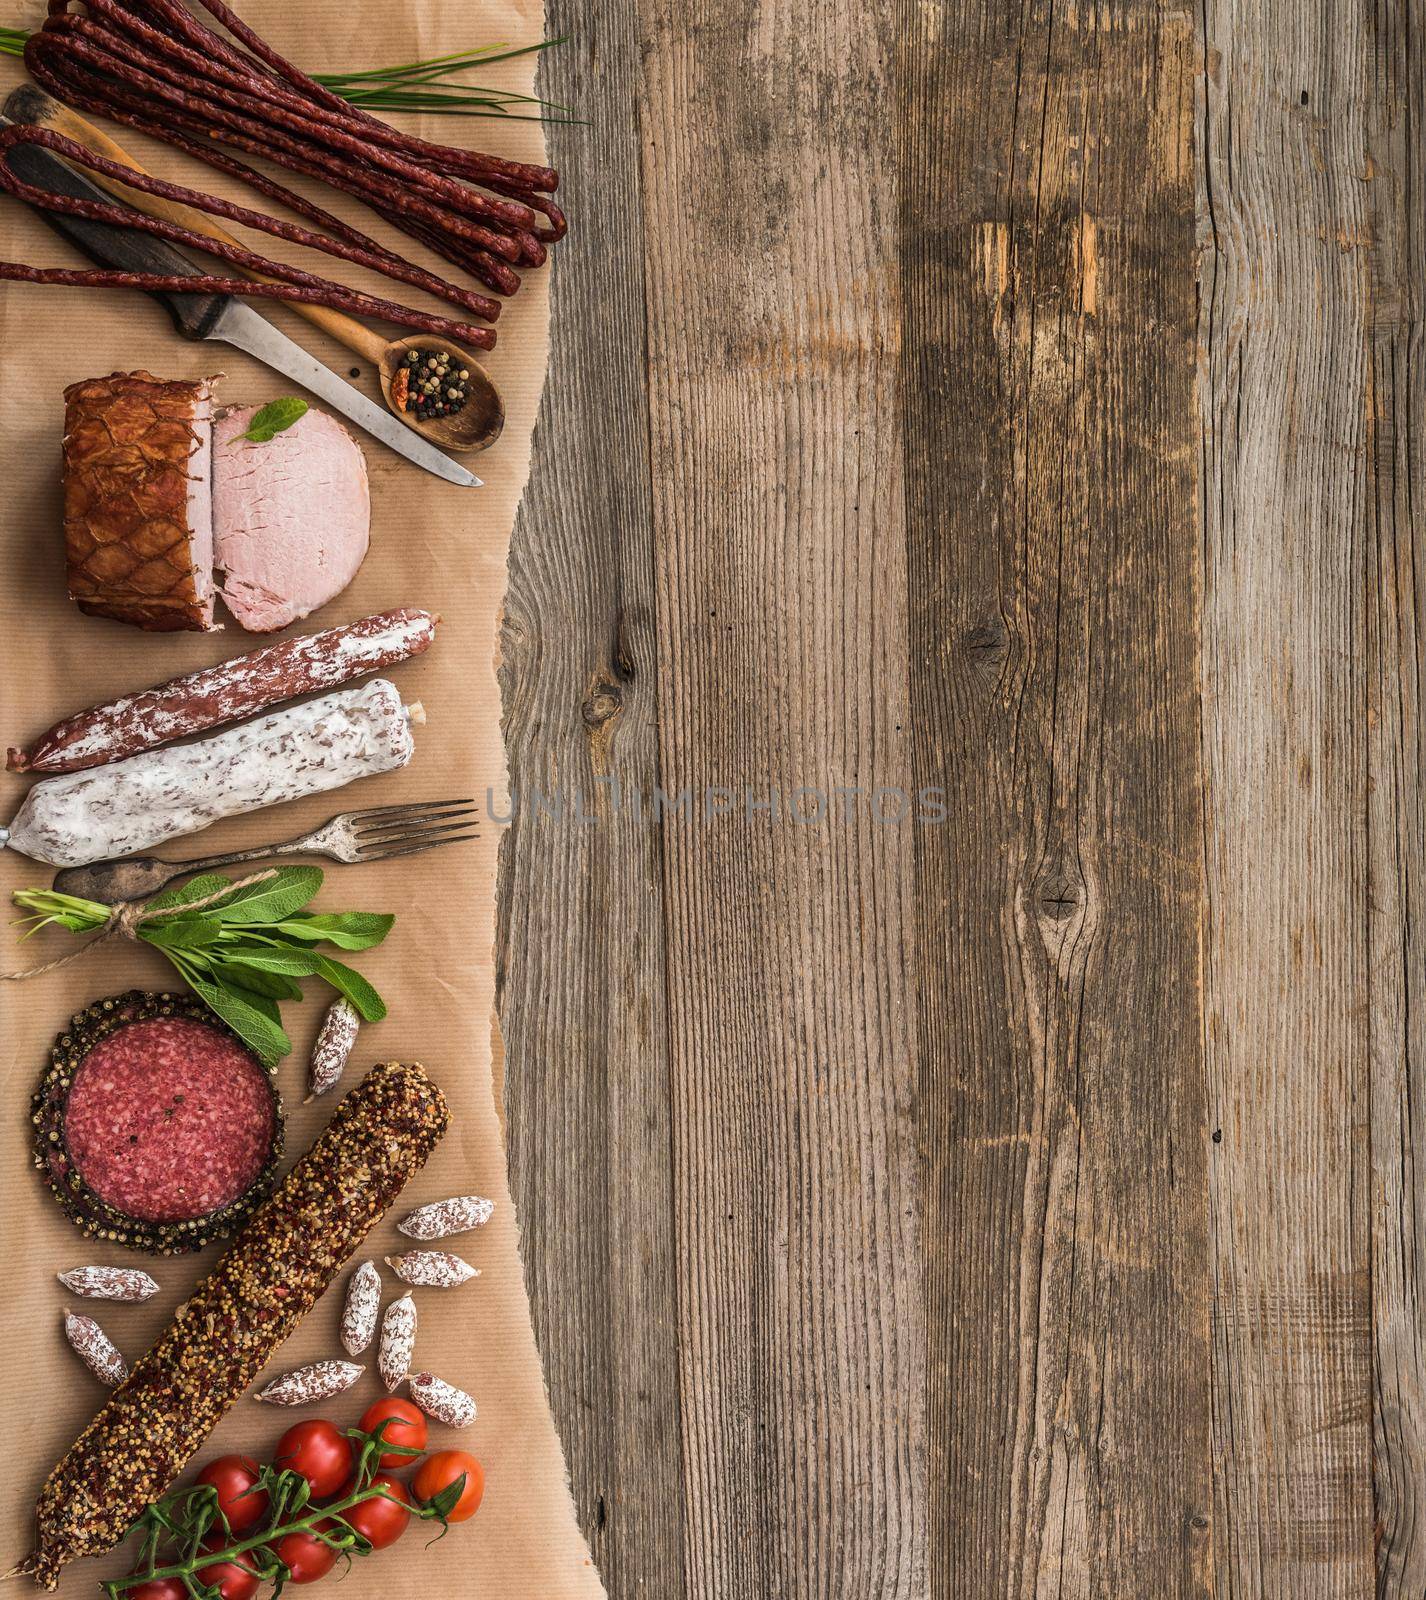 Assortment of cold meats over wooden background with space for text